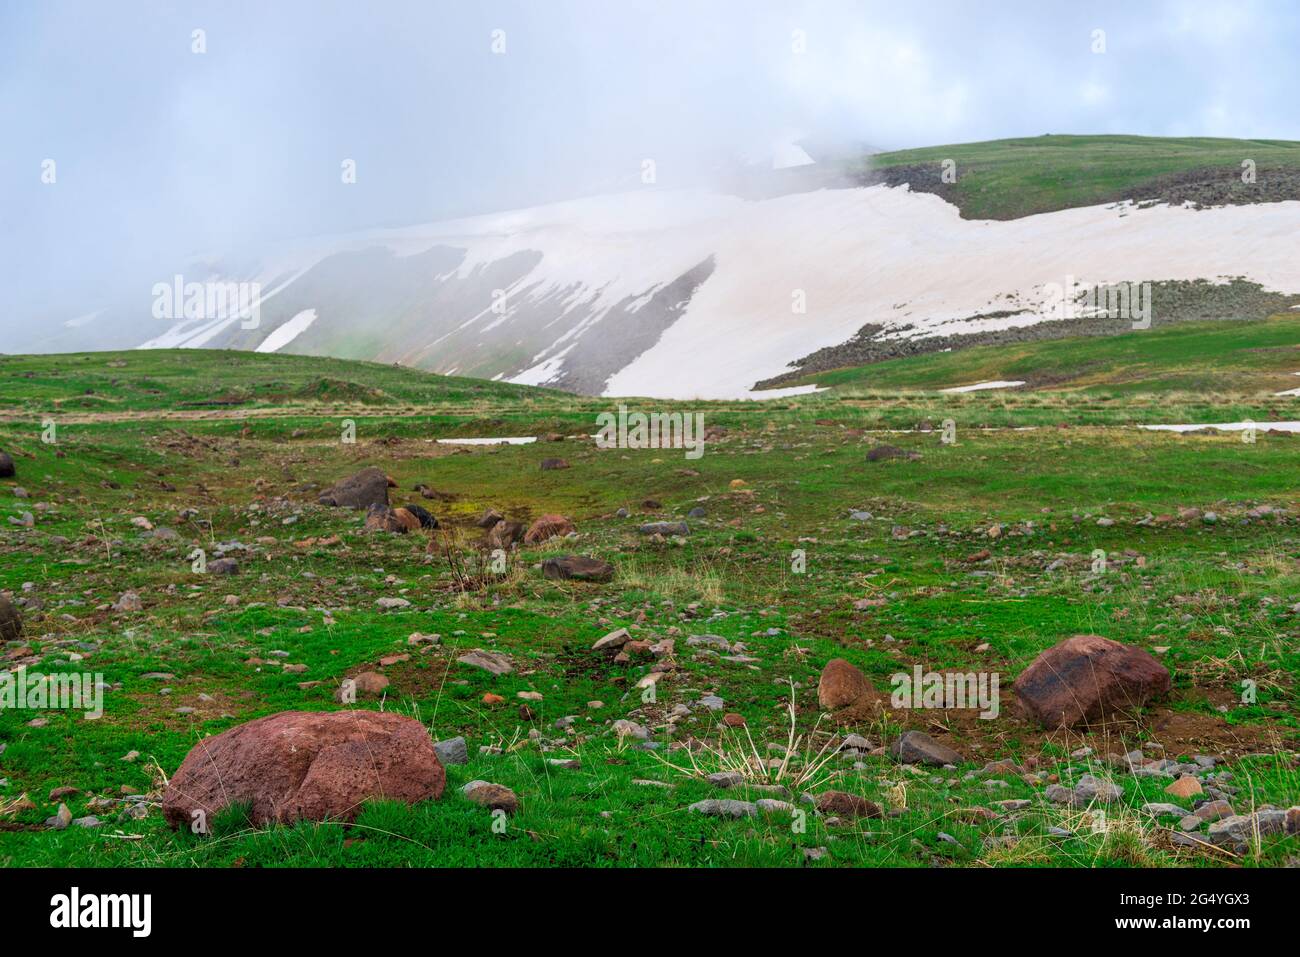 Highlands of Armenia with the remnants of snow in June Stock Photo